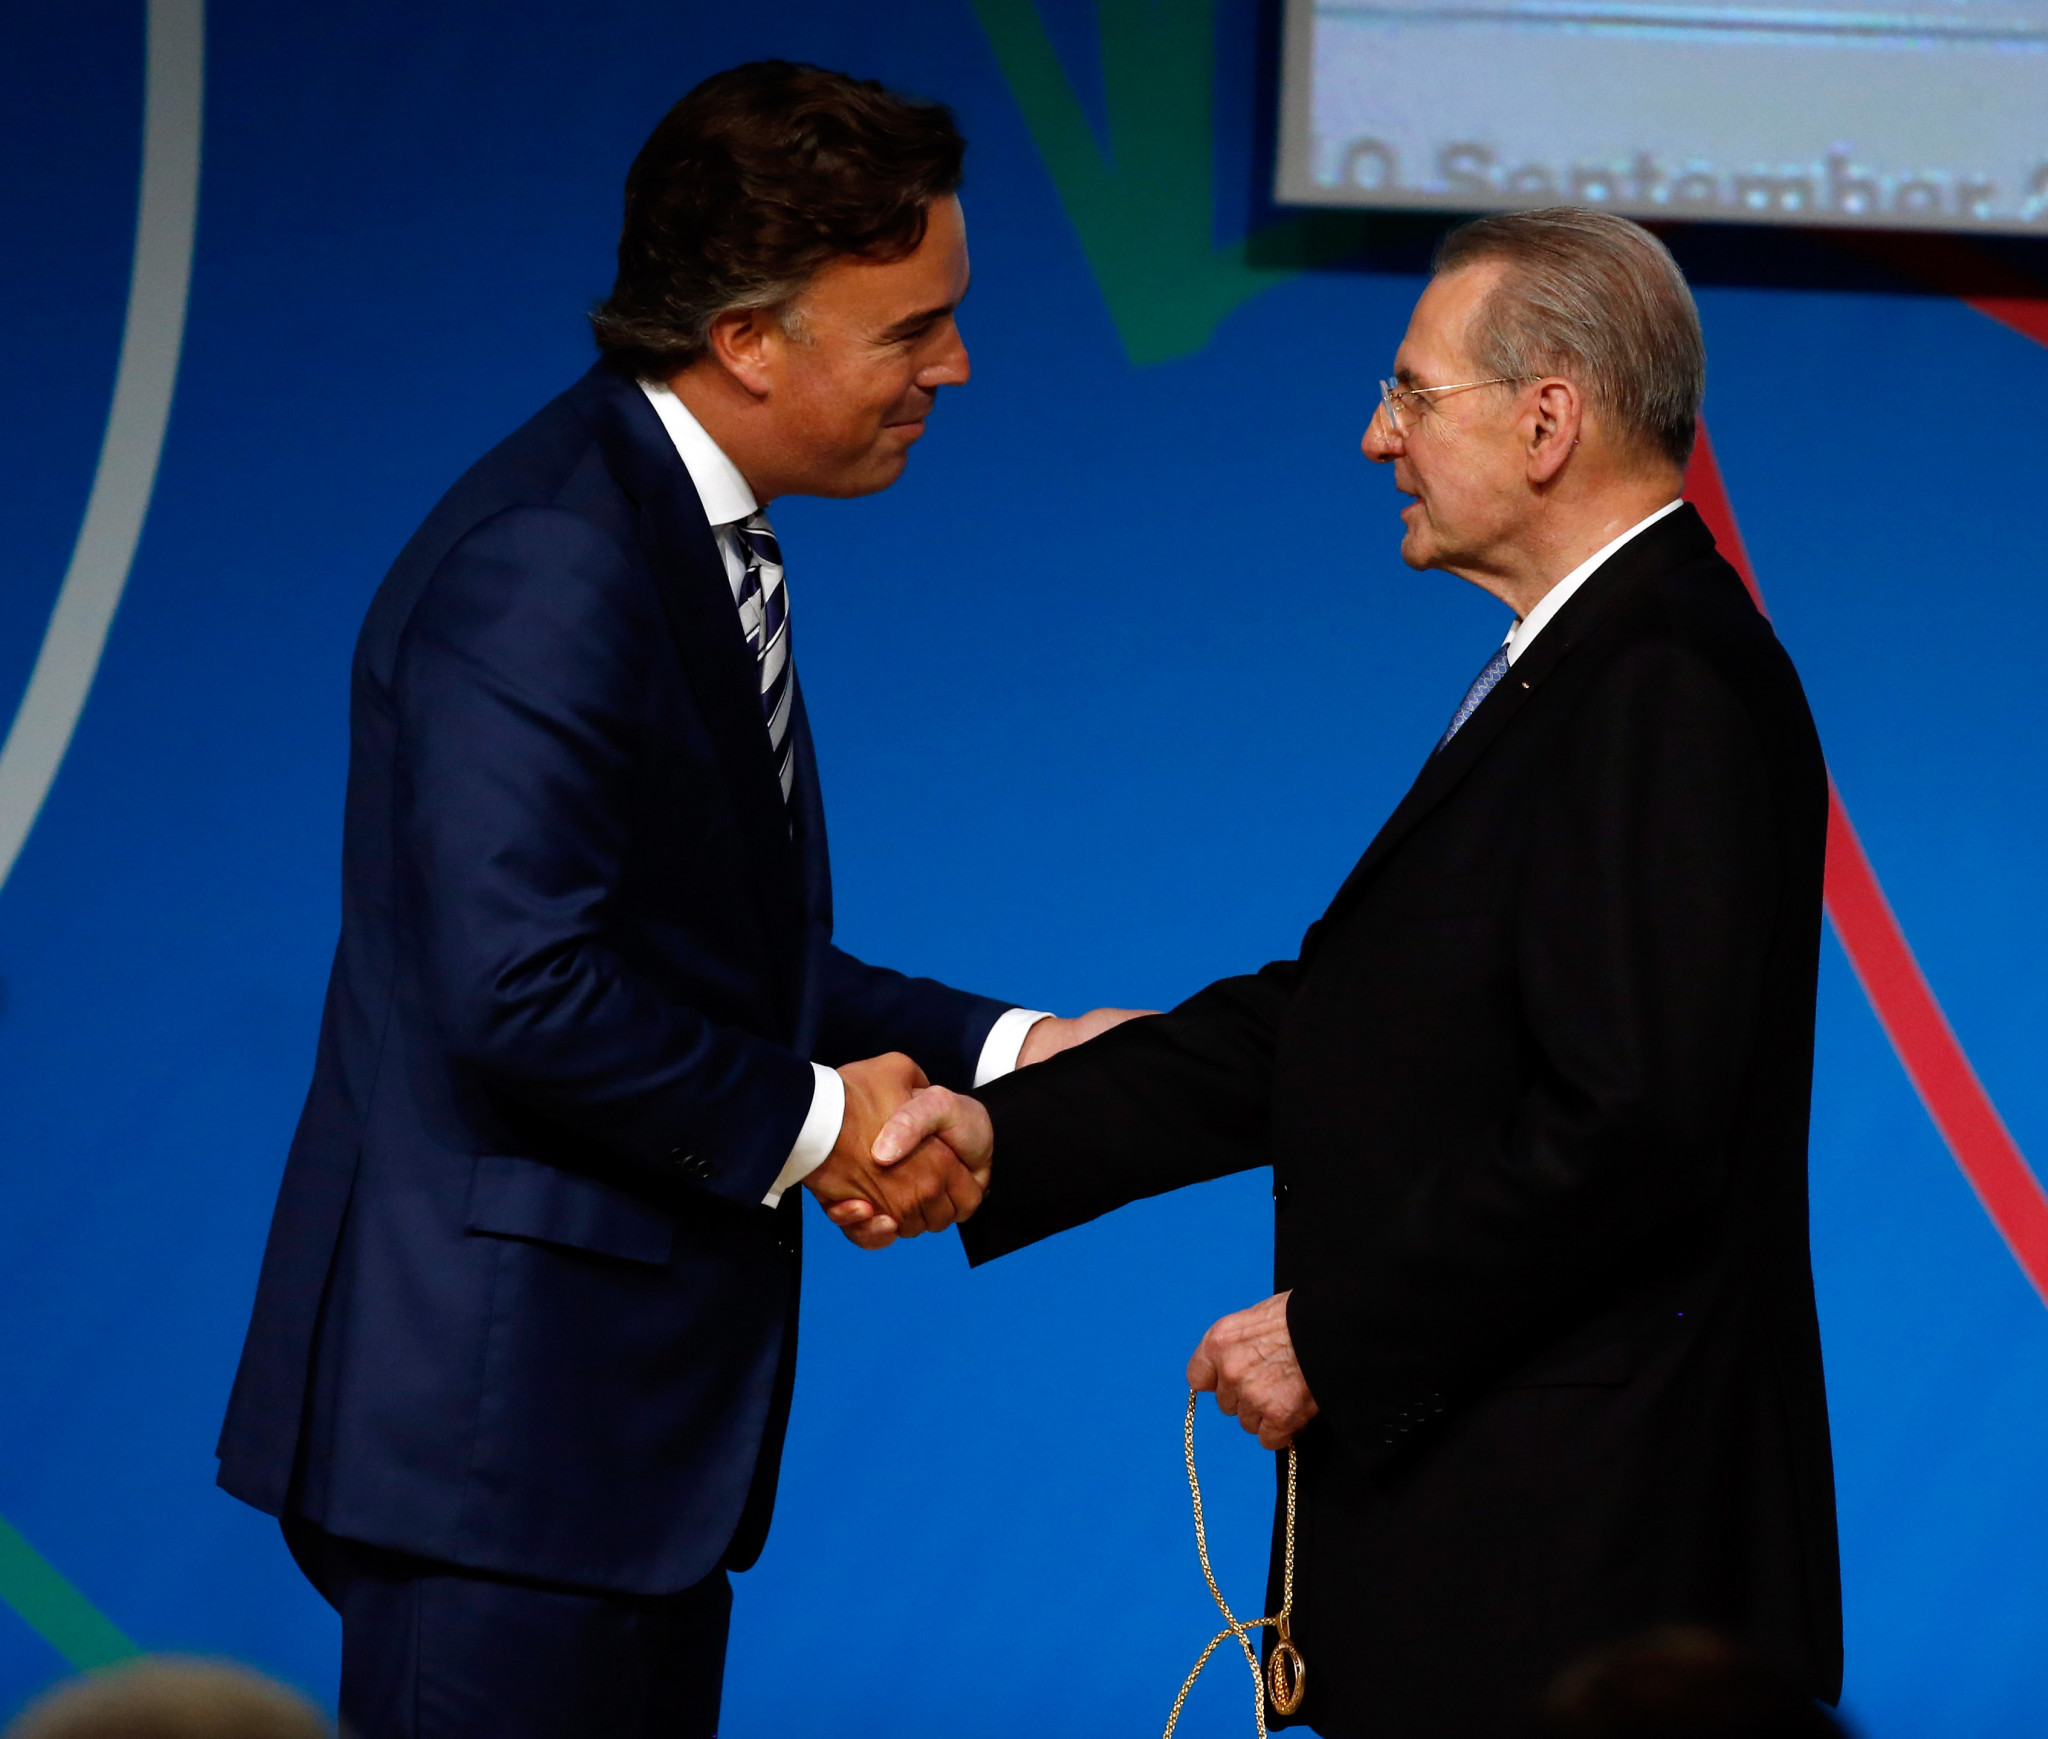 Camiel Eurlings, left, pictured being sworn in as an IOC member in one of Jacques Rogge's final acts as IOC President before being replaced by Thomas Bach in 2013 ©Getty Images